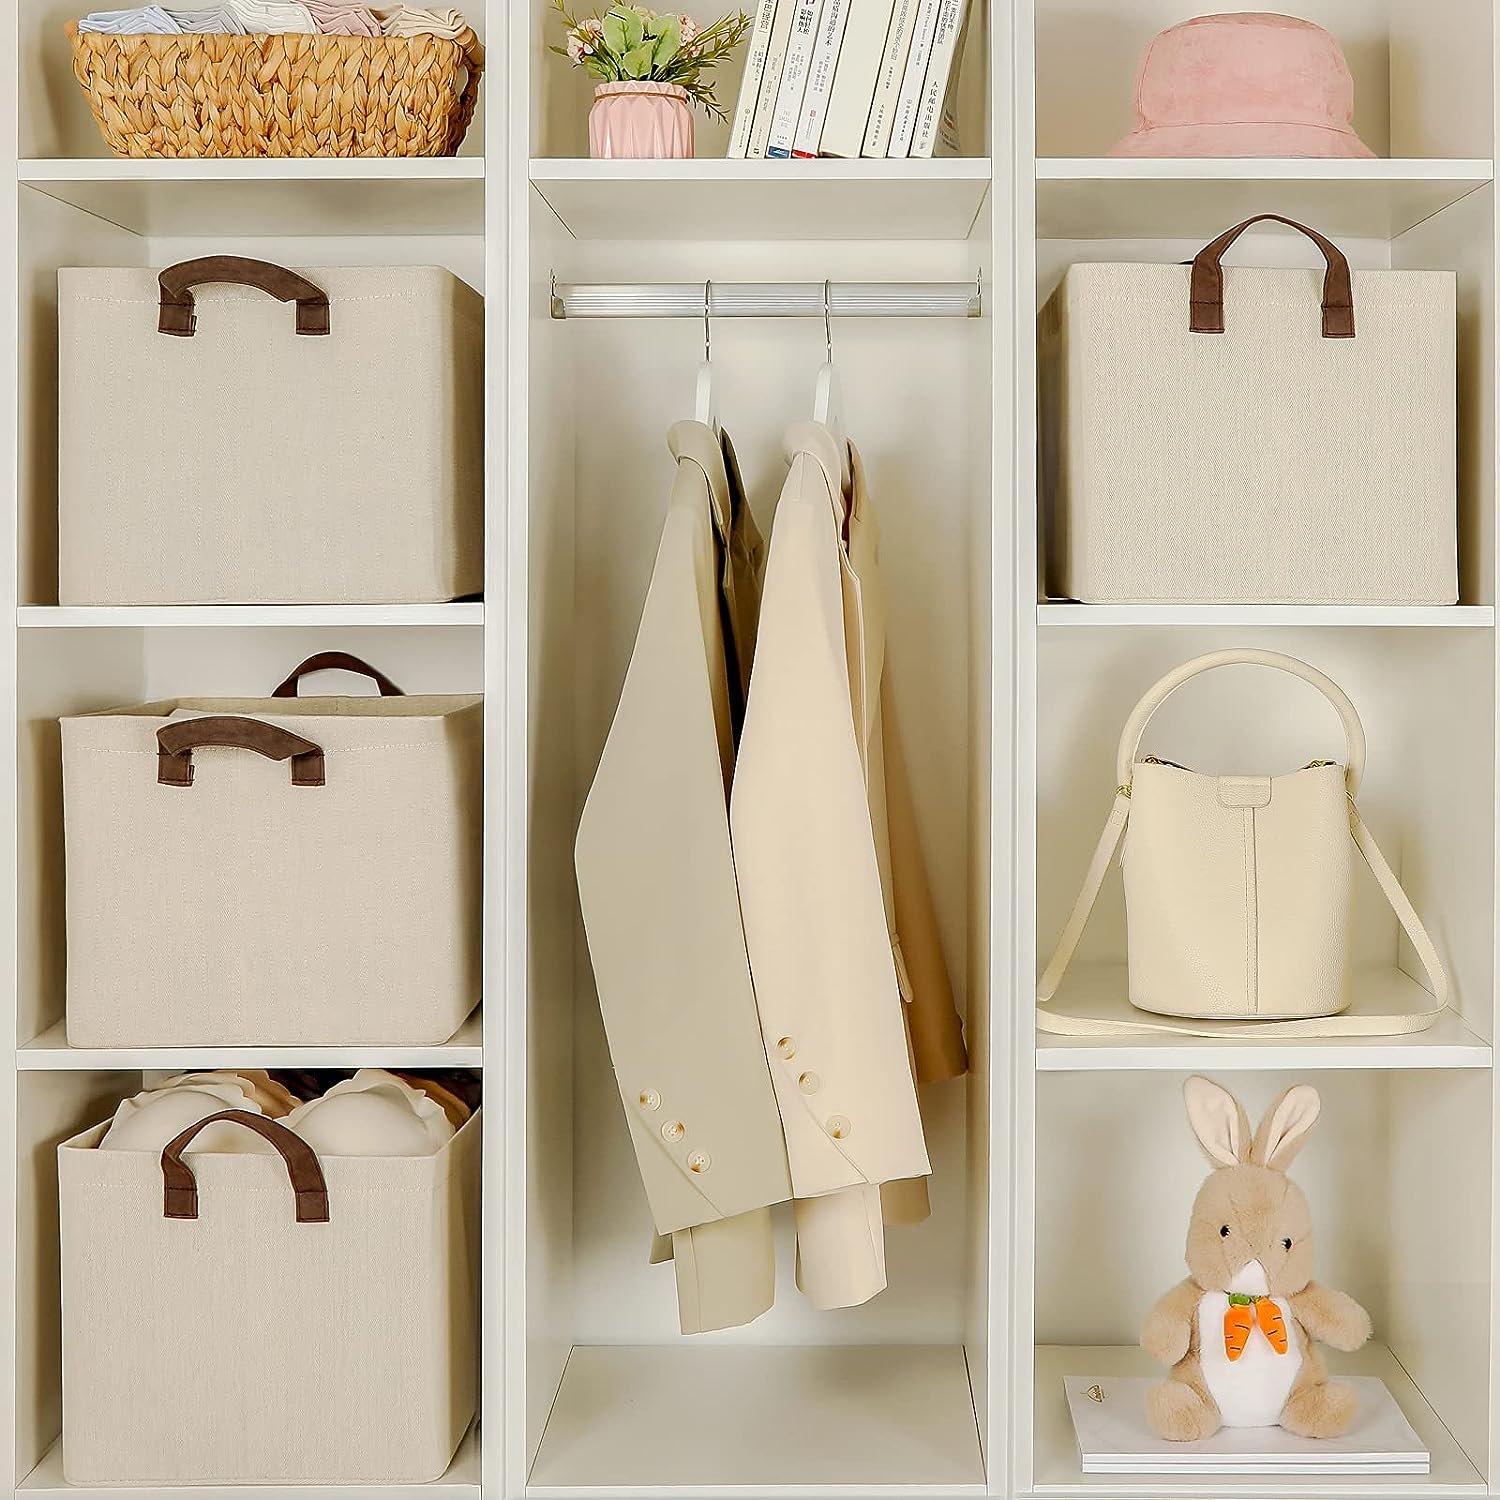 Blushbees Storage Baskets with Metal Frame for Organizing Wardrobe